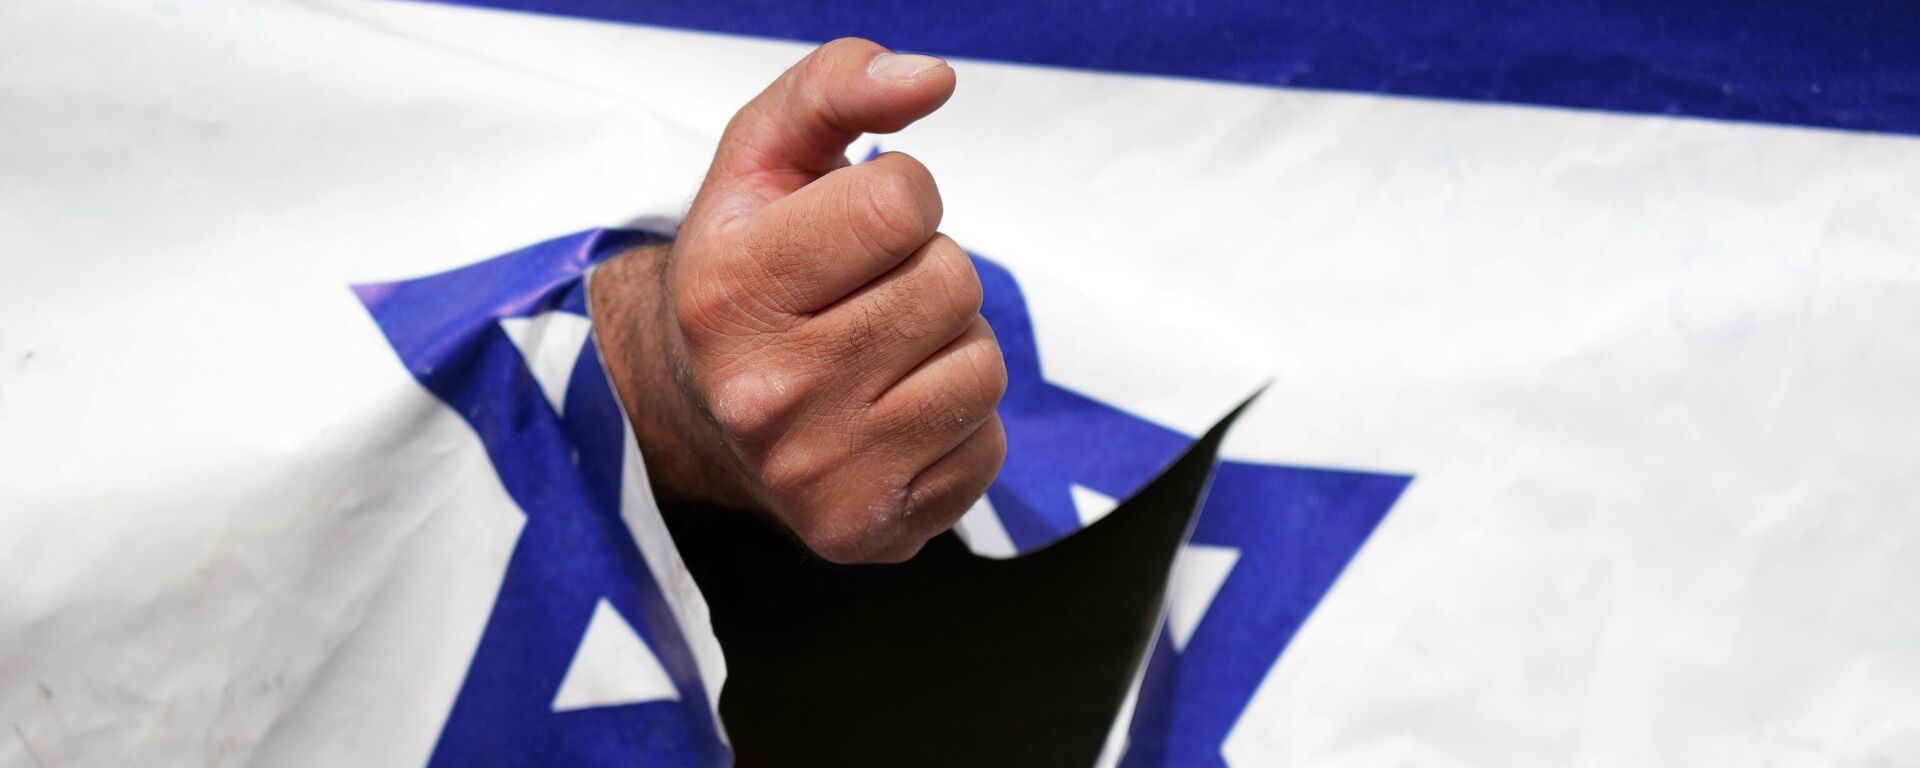 A demonstrator clenches his fist through a torn up representation of the Israeli flag in the annual pro-Palestinian Al-Quds, or Jerusalem, Day rally in Tehran, Iran, Friday, April 29, 2022 - Sputnik International, 1920, 05.09.2022